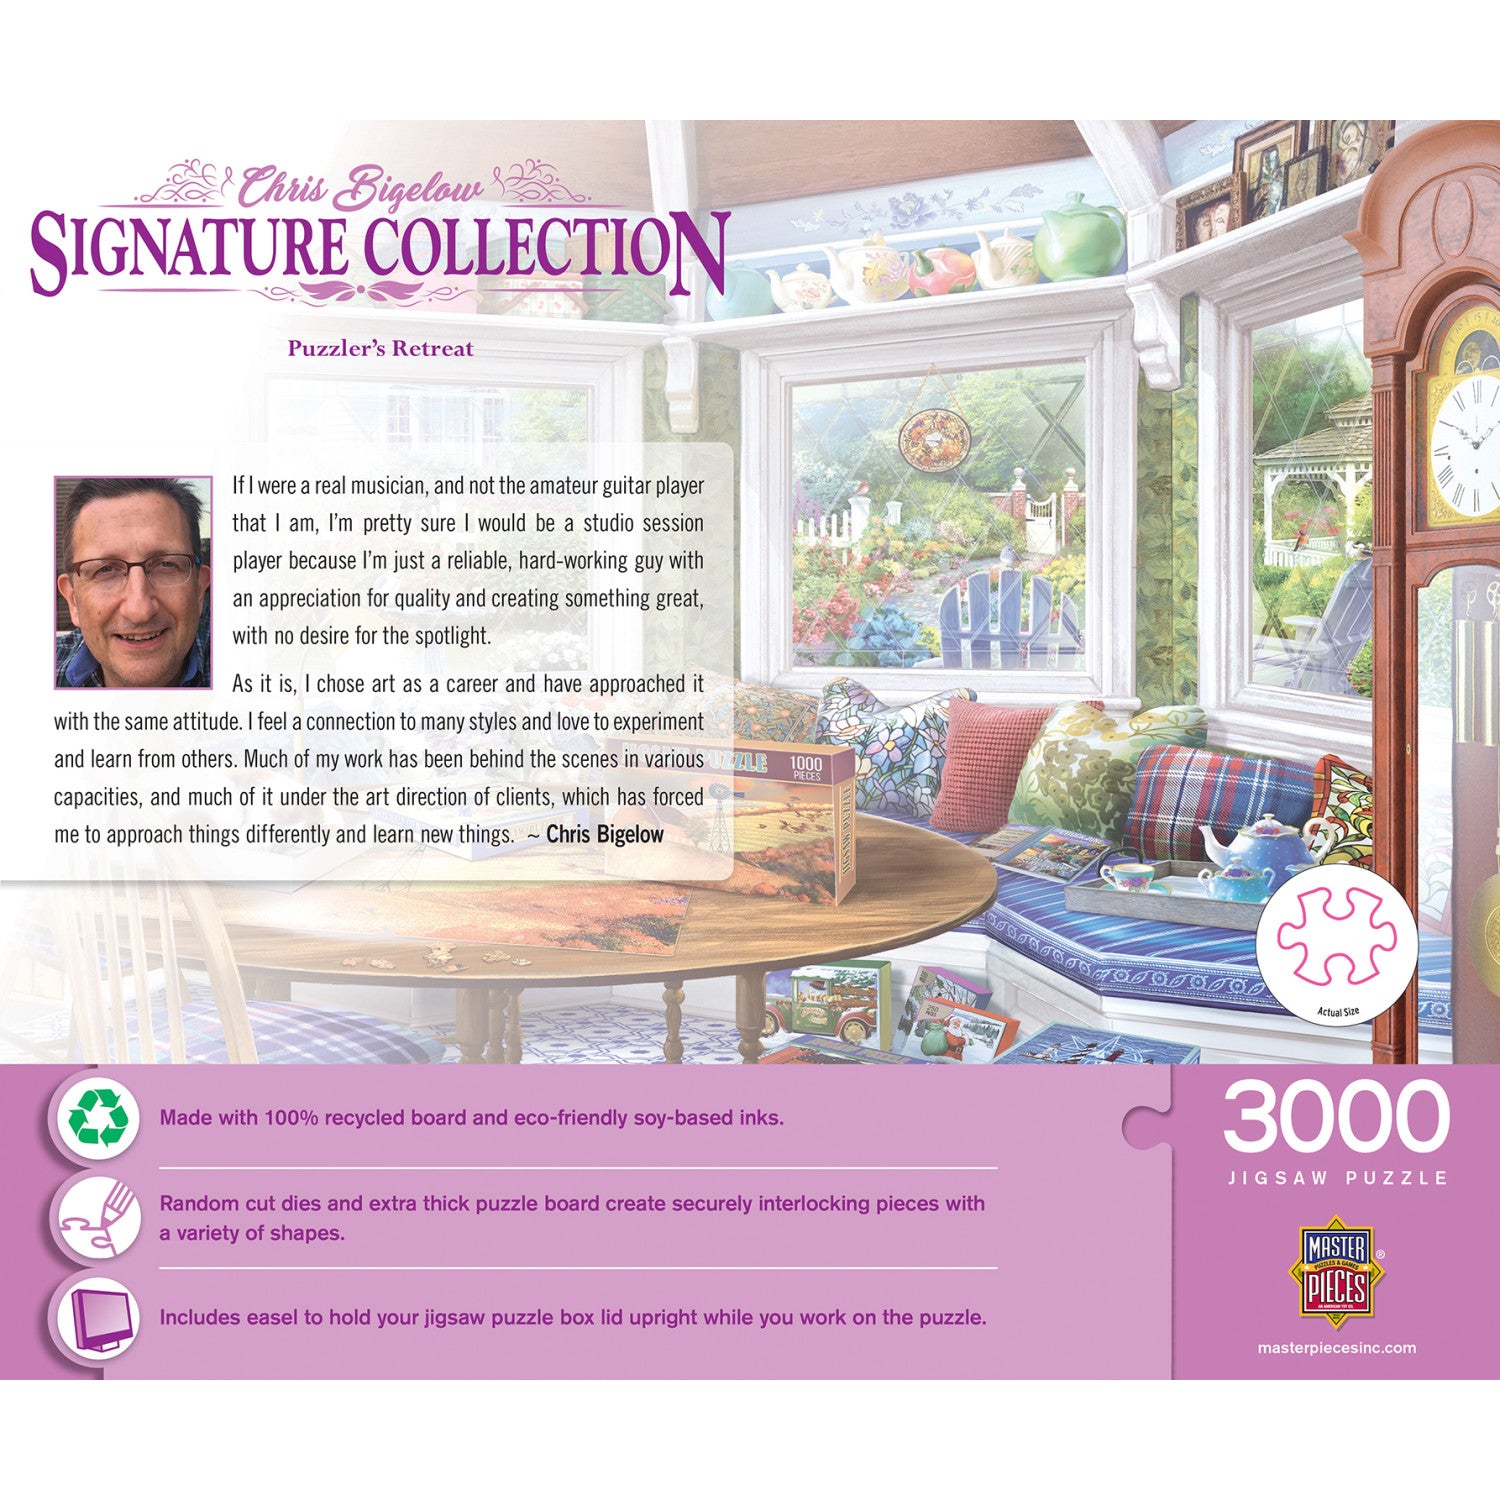 Signature Collection - Puzzler's Retreat 3000 Piece Jigsaw Puzzle